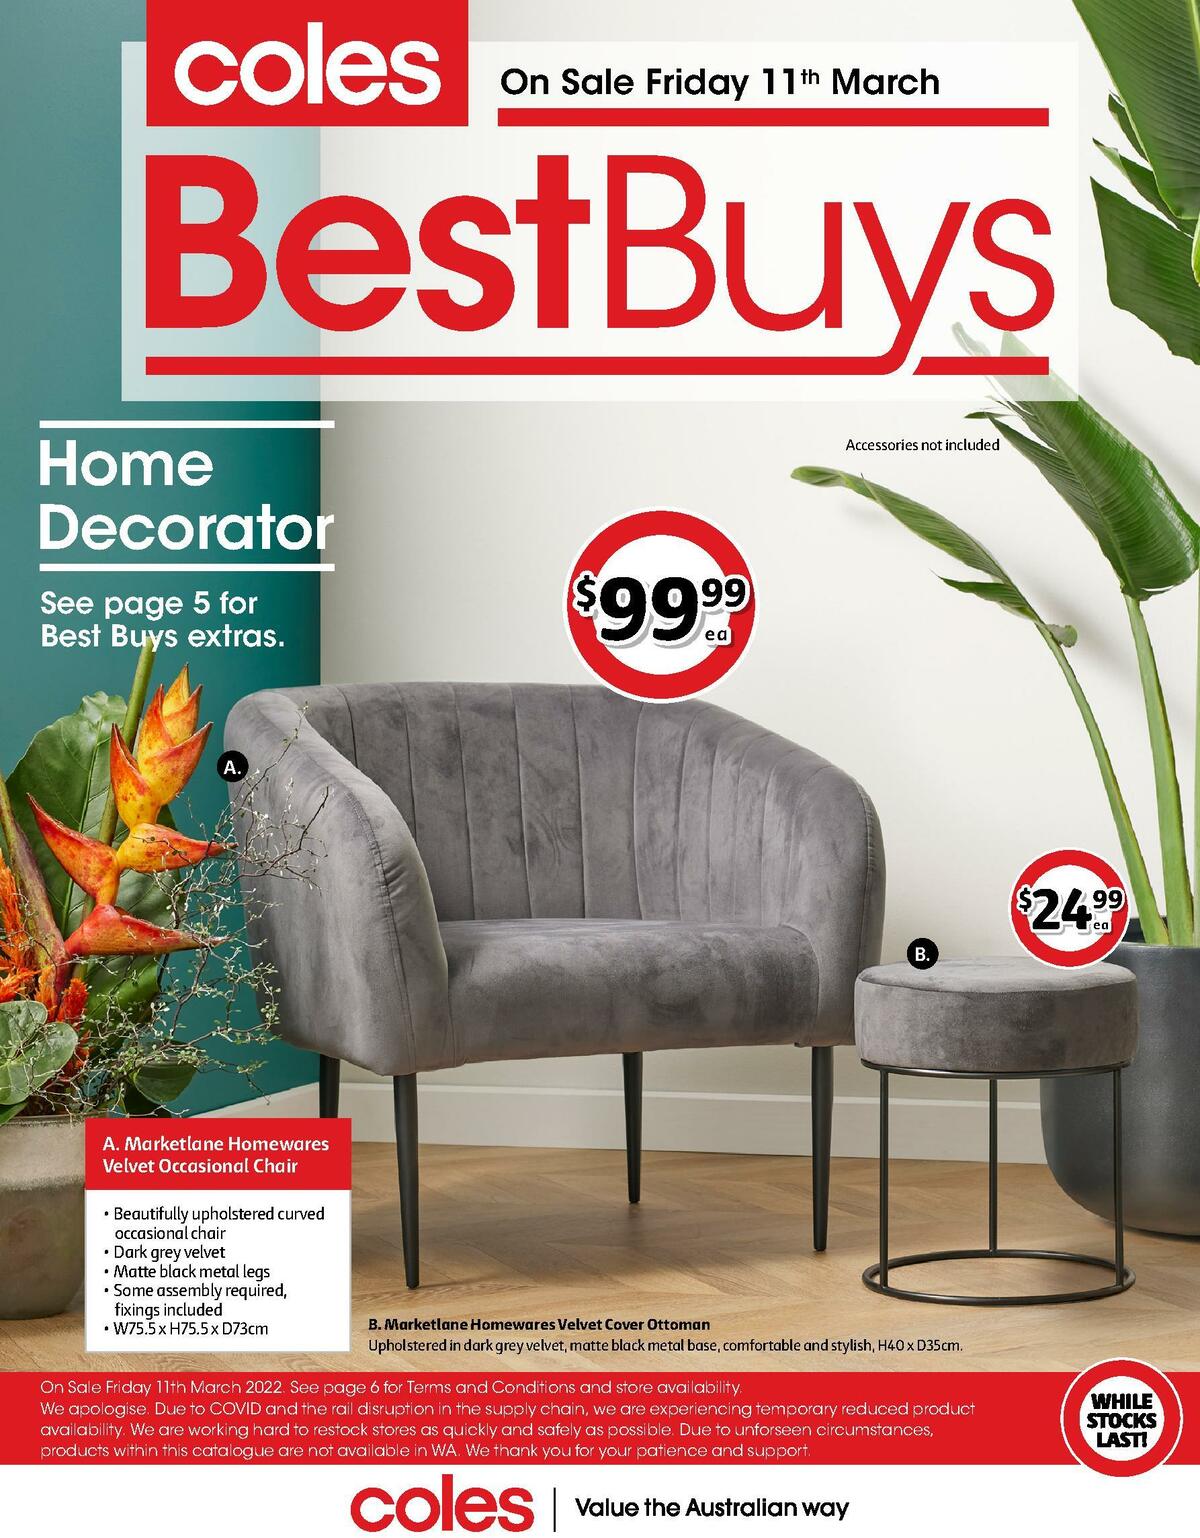 Coles Best Buys - Home Decorator Catalogues from 11 March